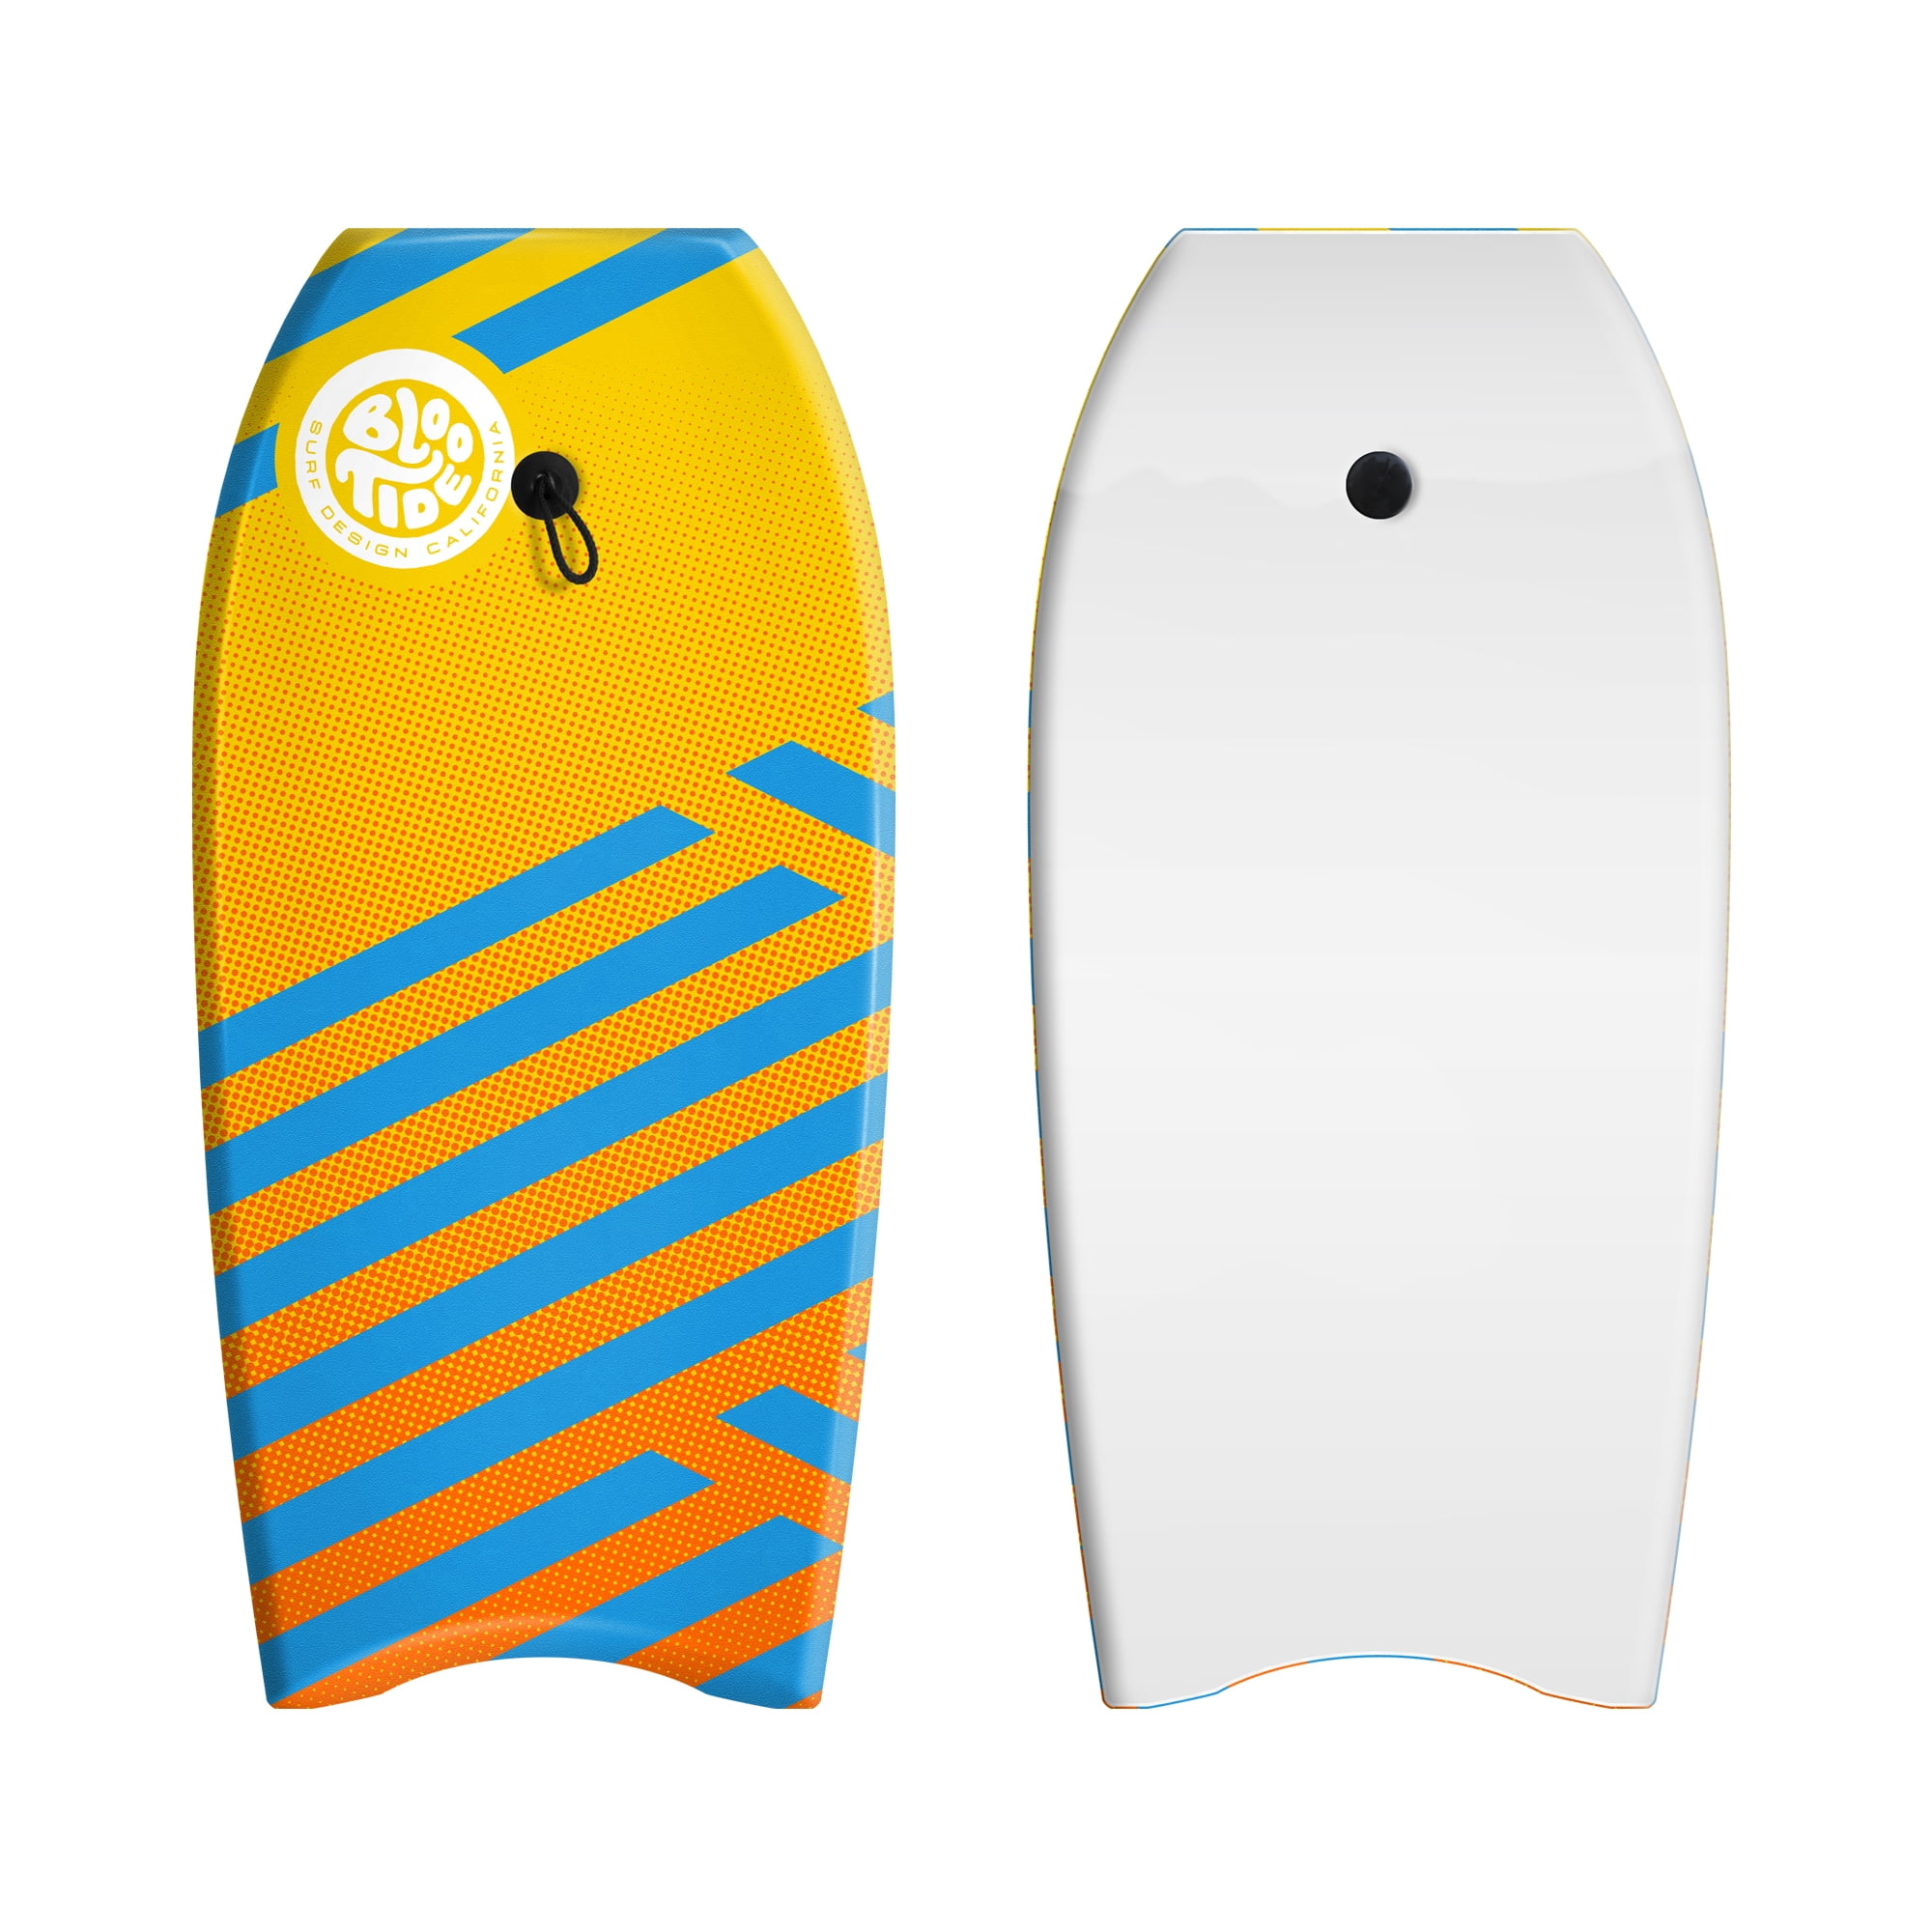 Bloo Tide 36in Bodyboard with basic leash - Yellow and Blue Stripe graphic top deck